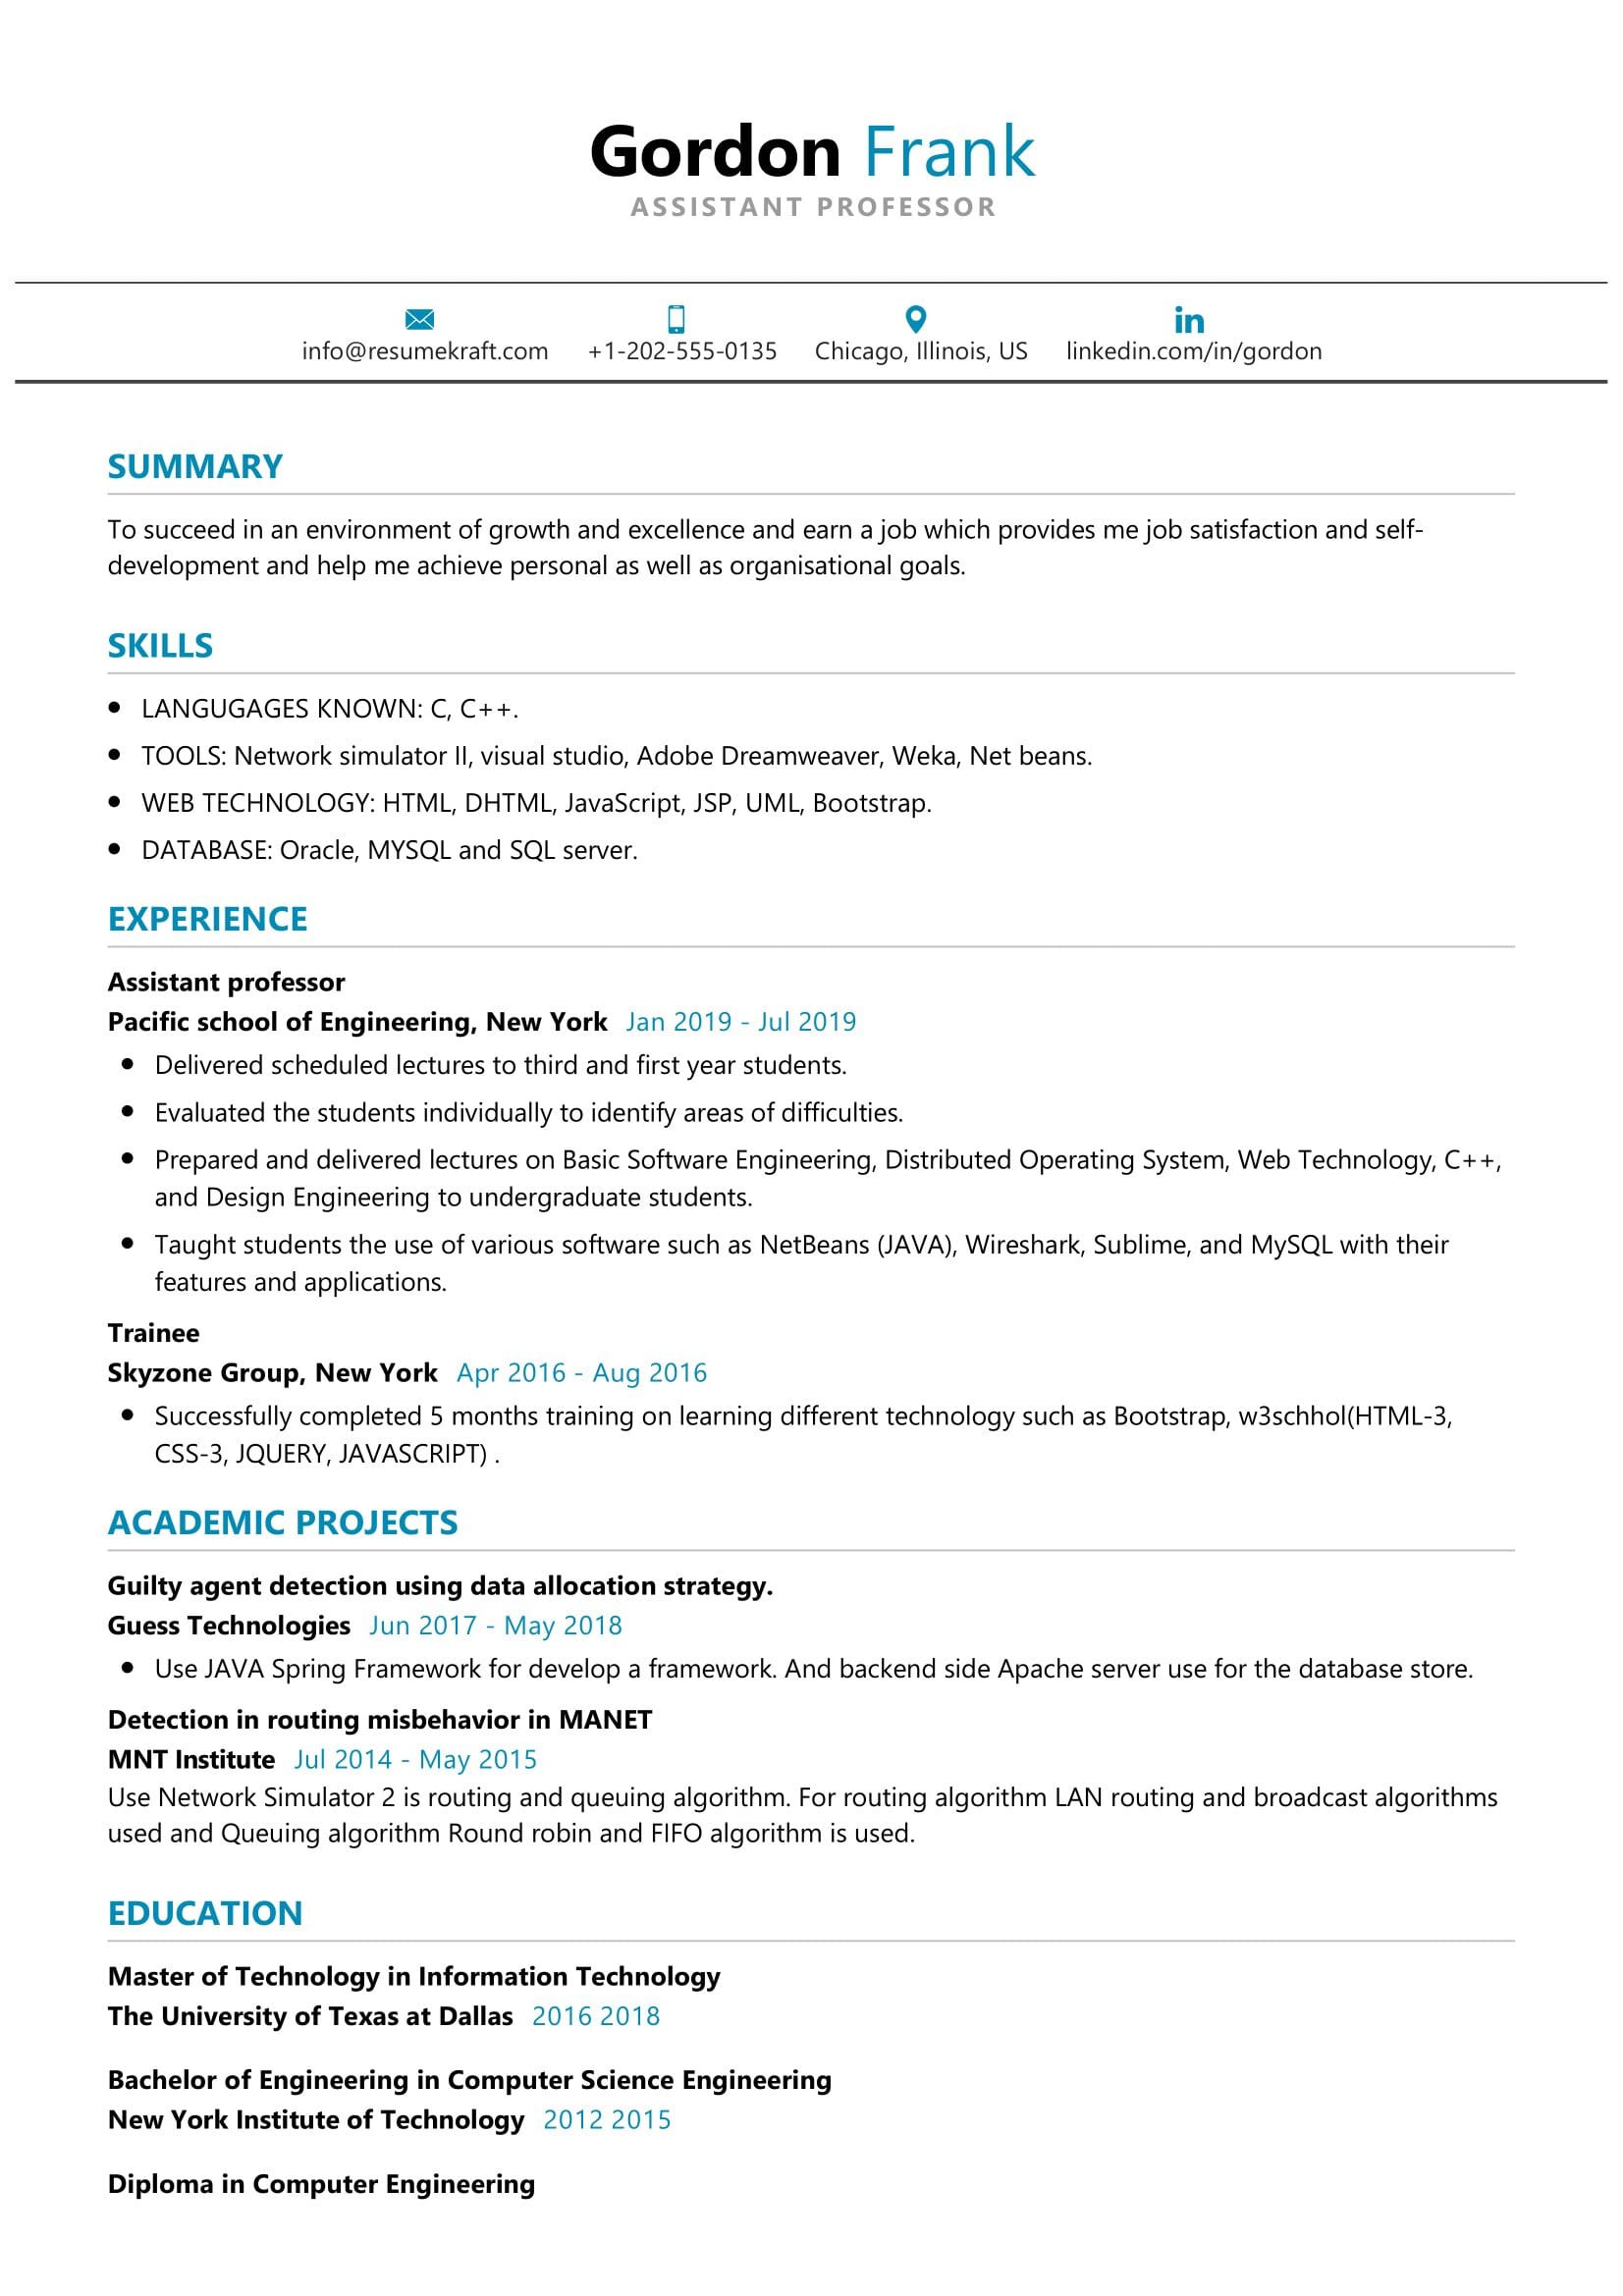 Sample Career Objective for assistant Professor Resume assistant Professor Resume Sample Resumekraft